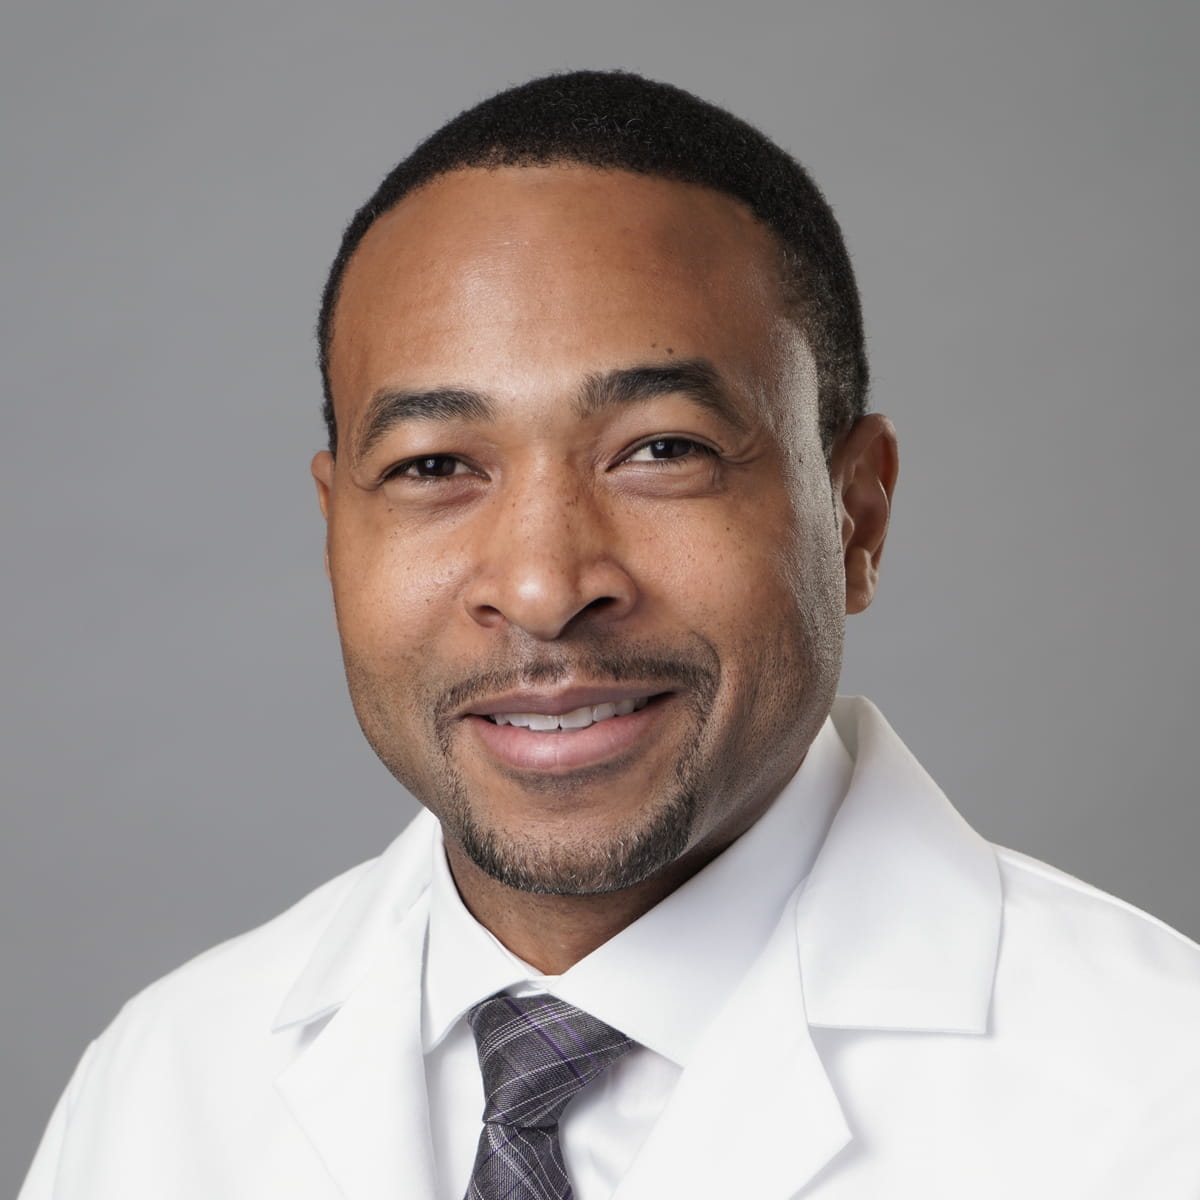 A friendly image of Robert Bookman, MD